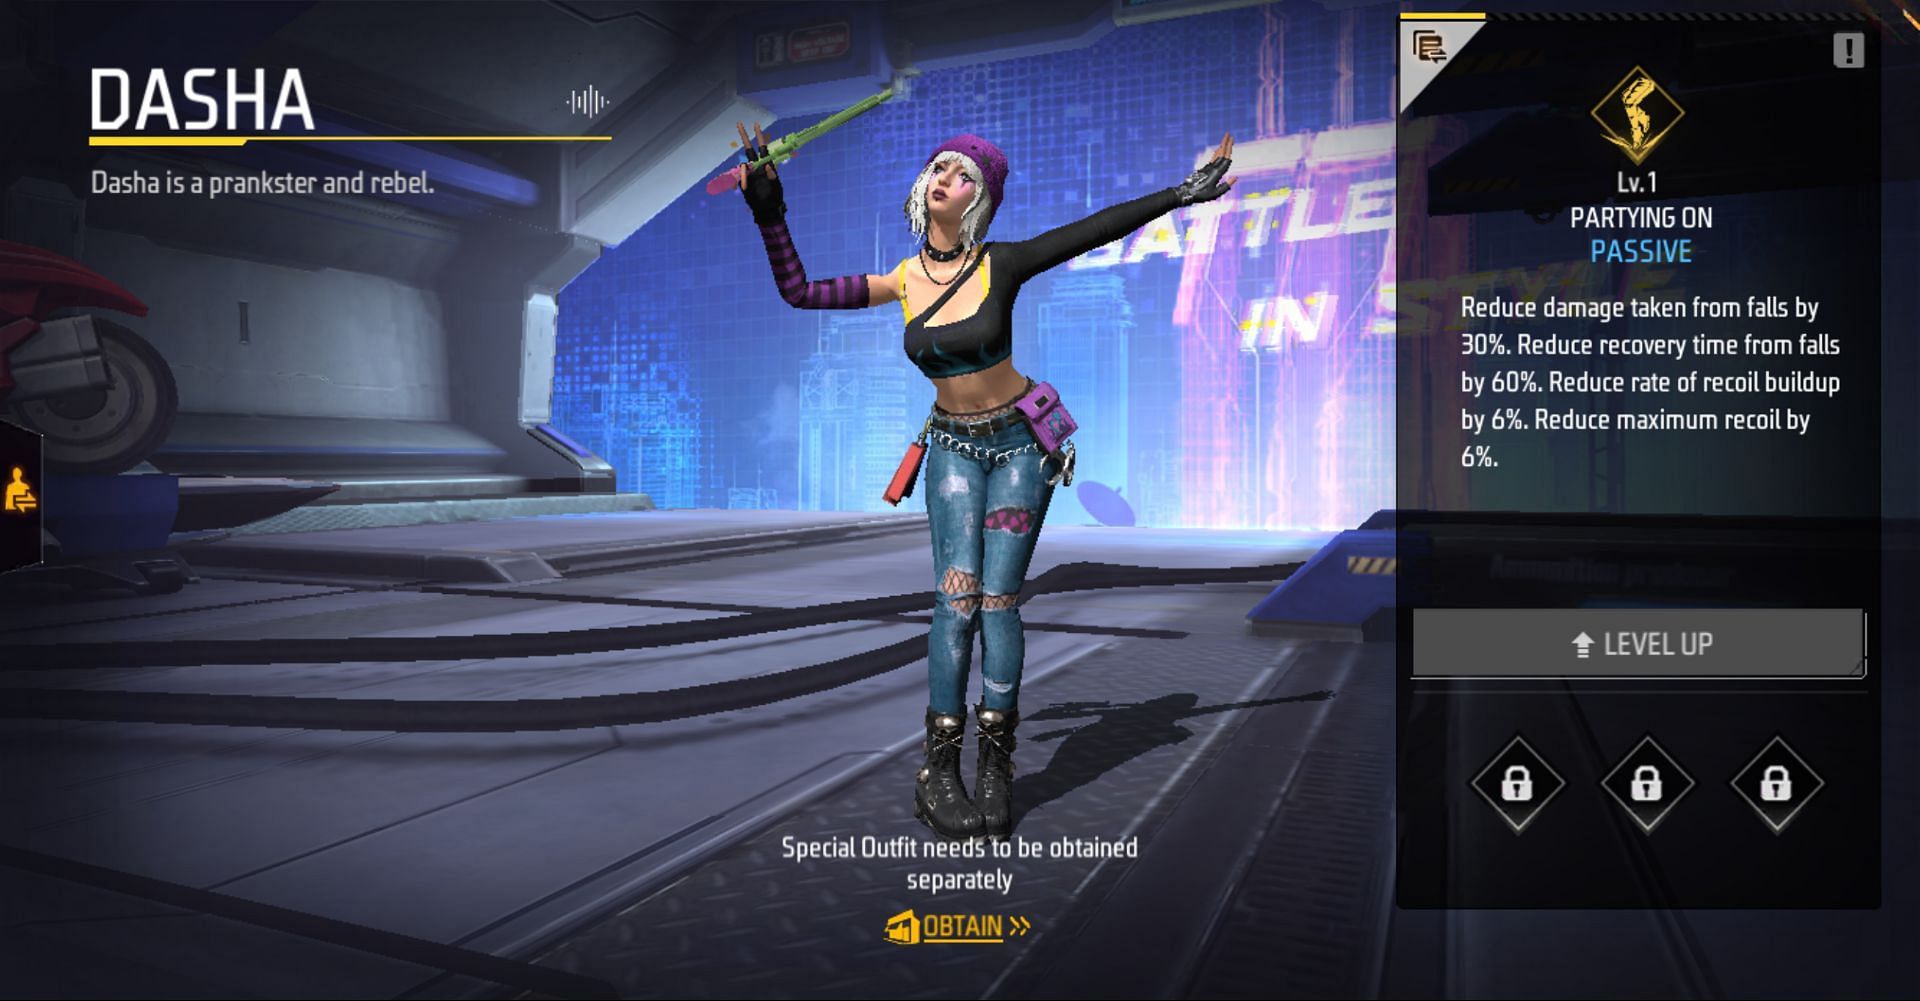 Dasha&#039;s Partying On ability helps with recoil control (Image via Garena)